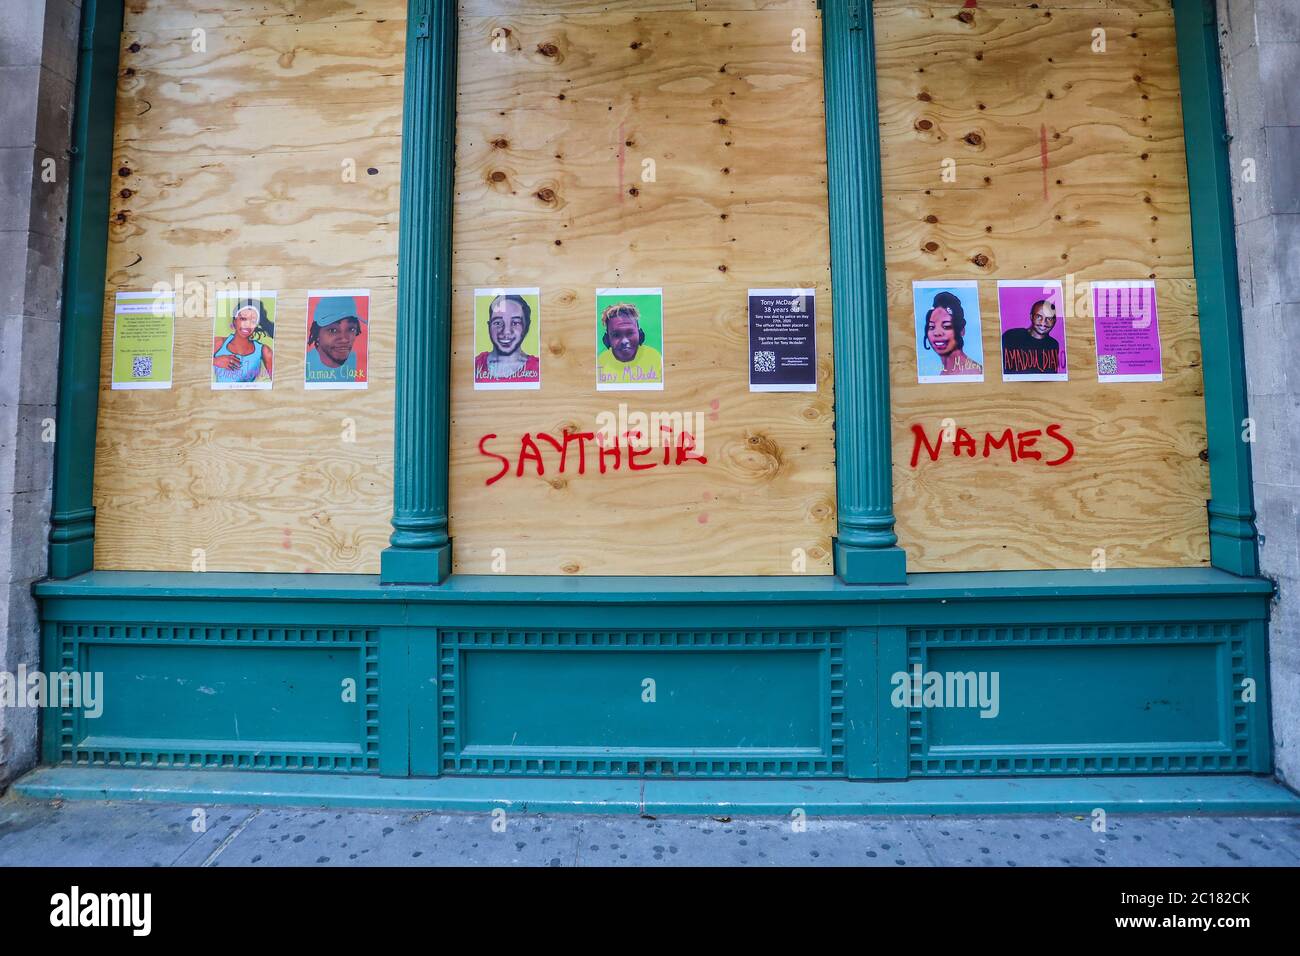 New York, United States. 14th June, 2020. New York residents and artists express their art and leave messages of love, hope and social justice on shop closings that are scattered throughout the city during the Coronavirus COVID-19 pandemic and protests against racism in the United States. Credit: Brazil Photo Press/Alamy Live News Stock Photo